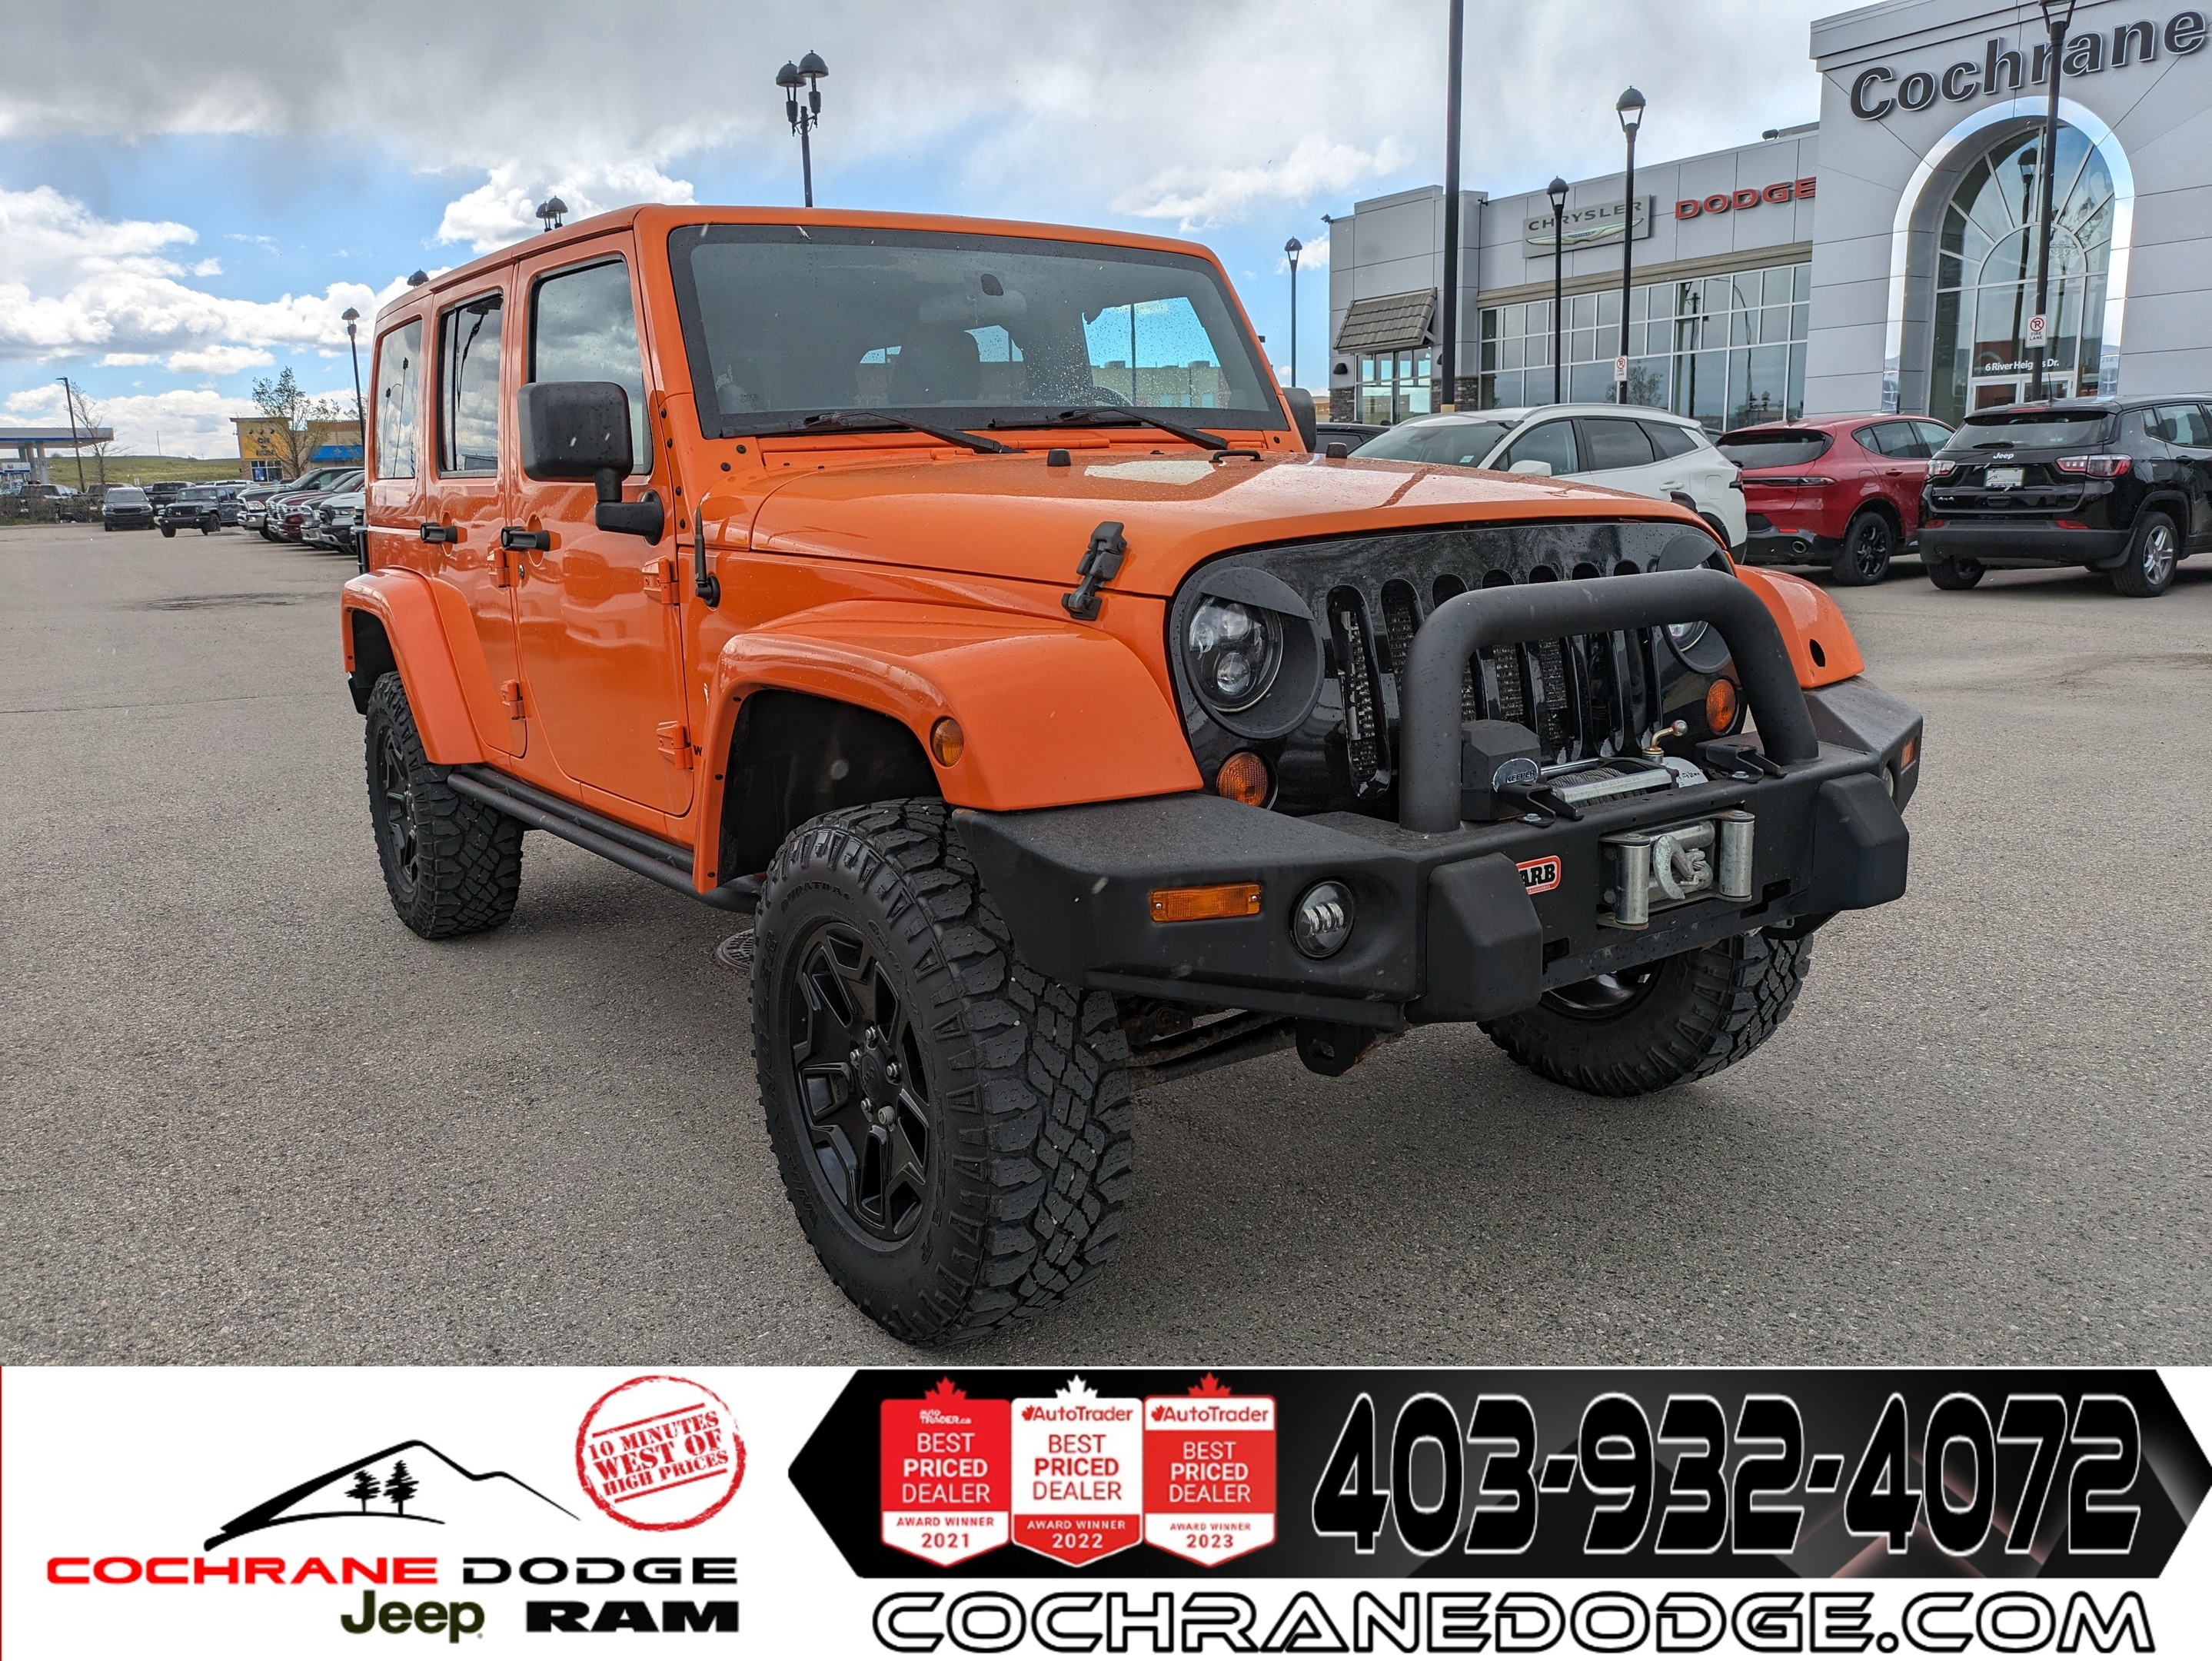 2012 Jeep WRANGLER UNLIMITED Sahara 4DR Auto with Leather!